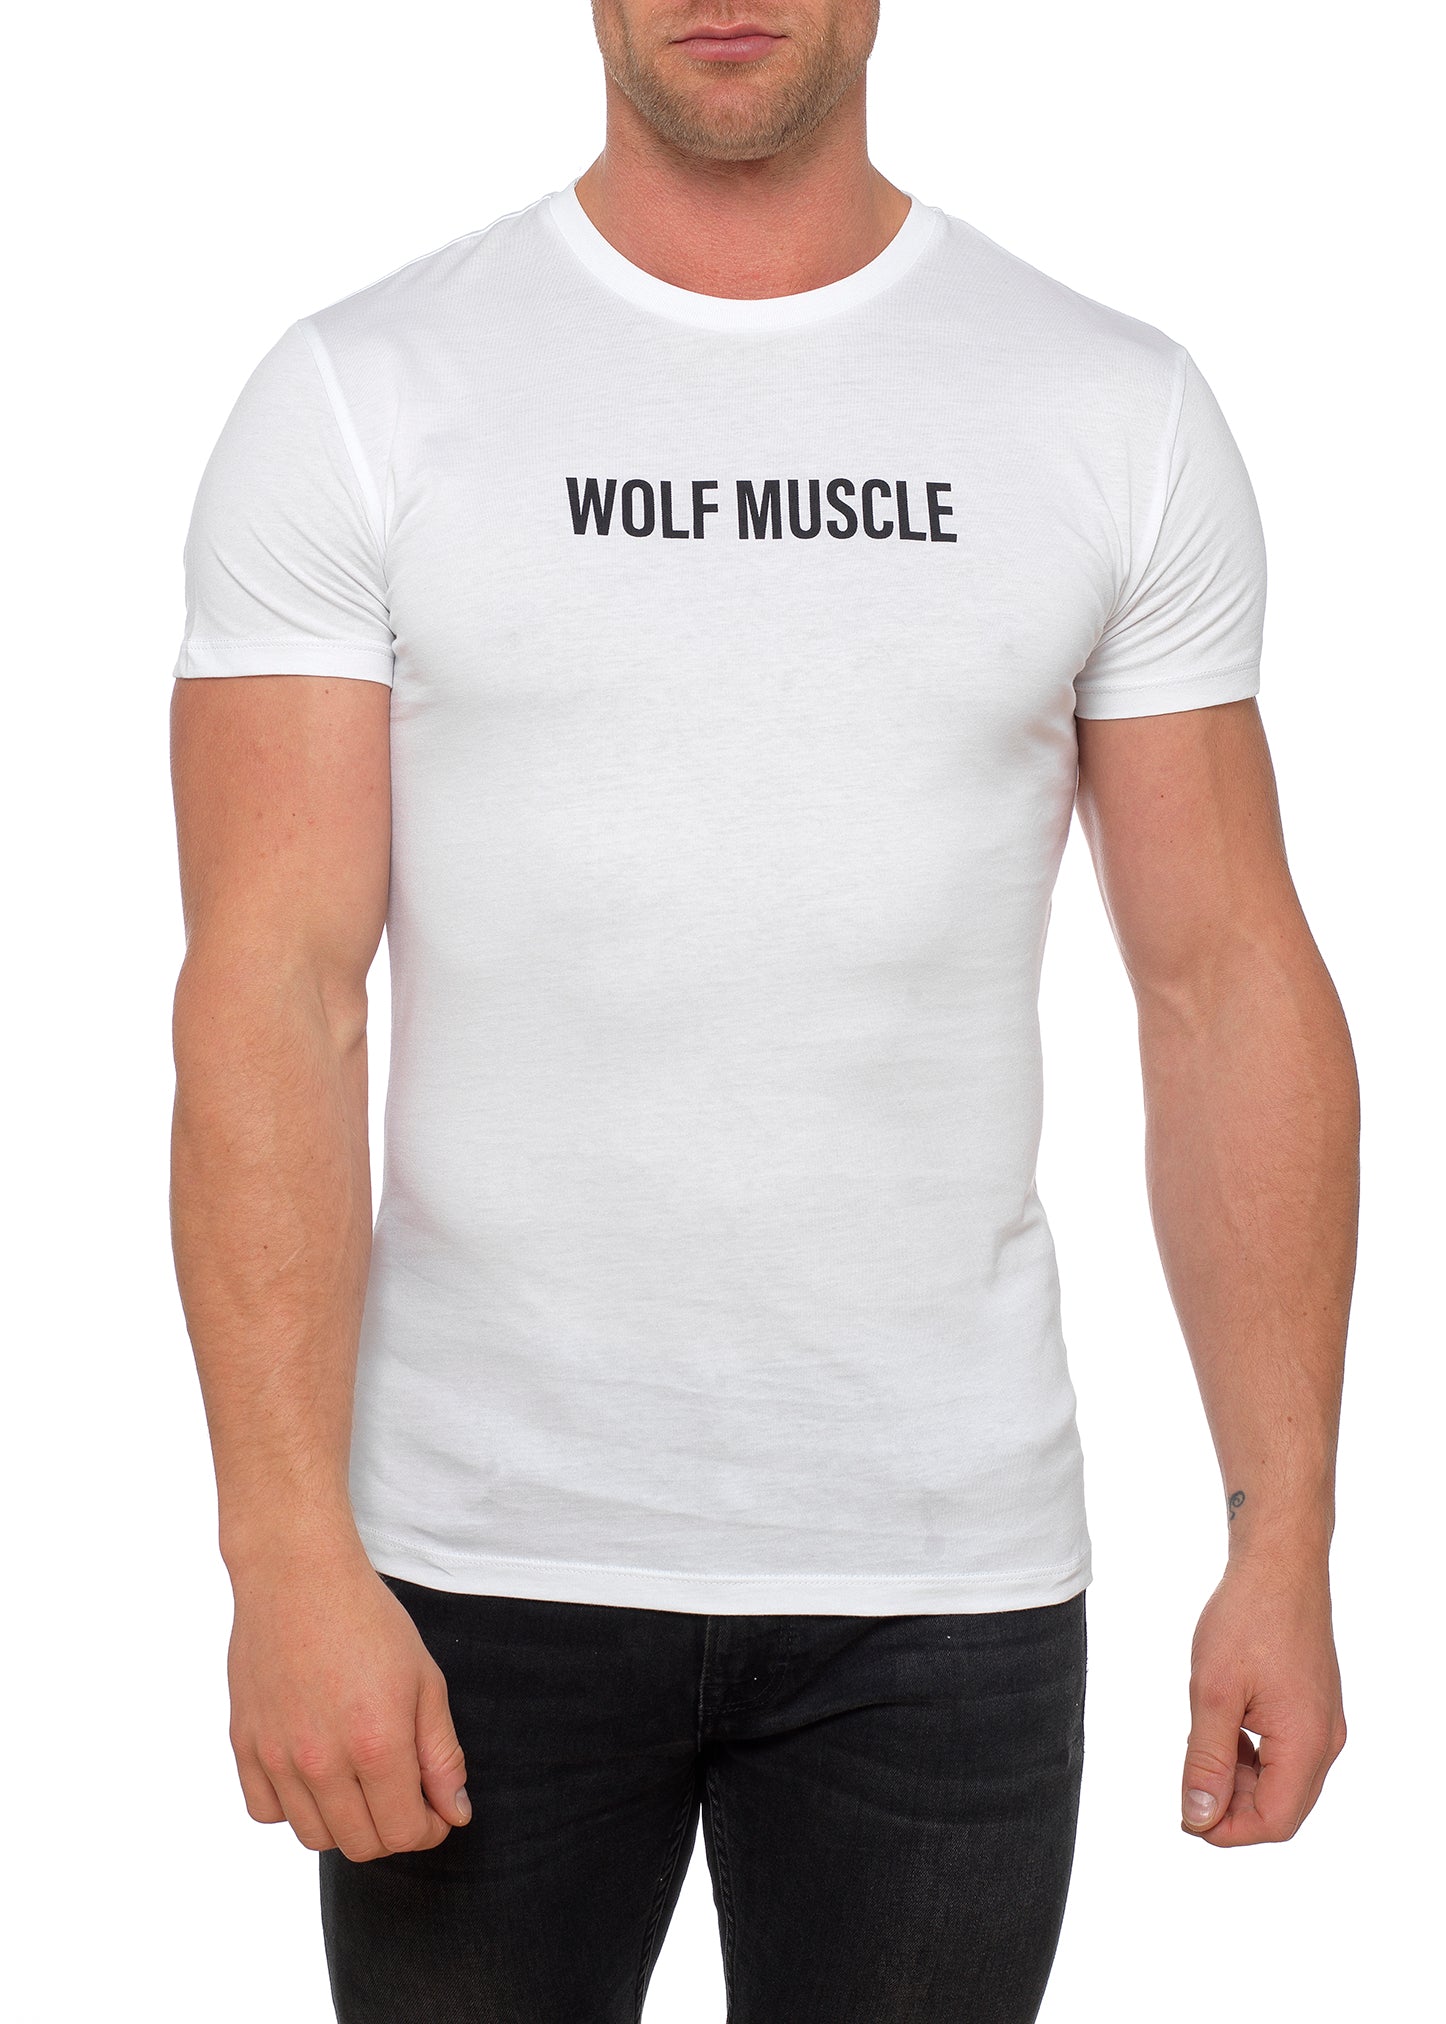 Mens Muscle Fit White T Shirts